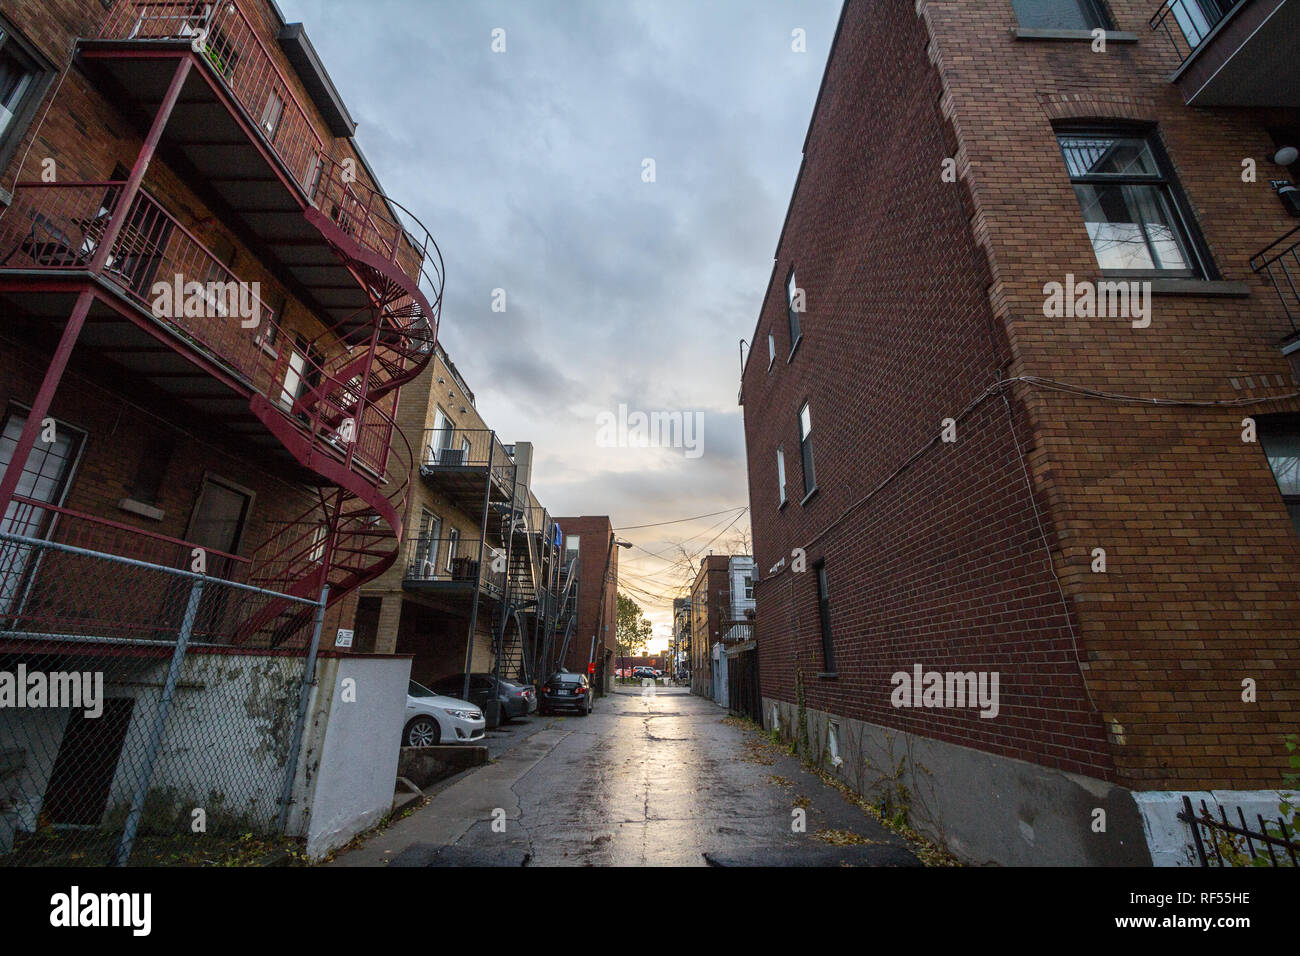 MONTREAL, CANADA - NOVEMBER 6, 2018: Dilapidated typical north American residential street in autumn in Montreal, Quebec, during a rainy day, with car Stock Photo